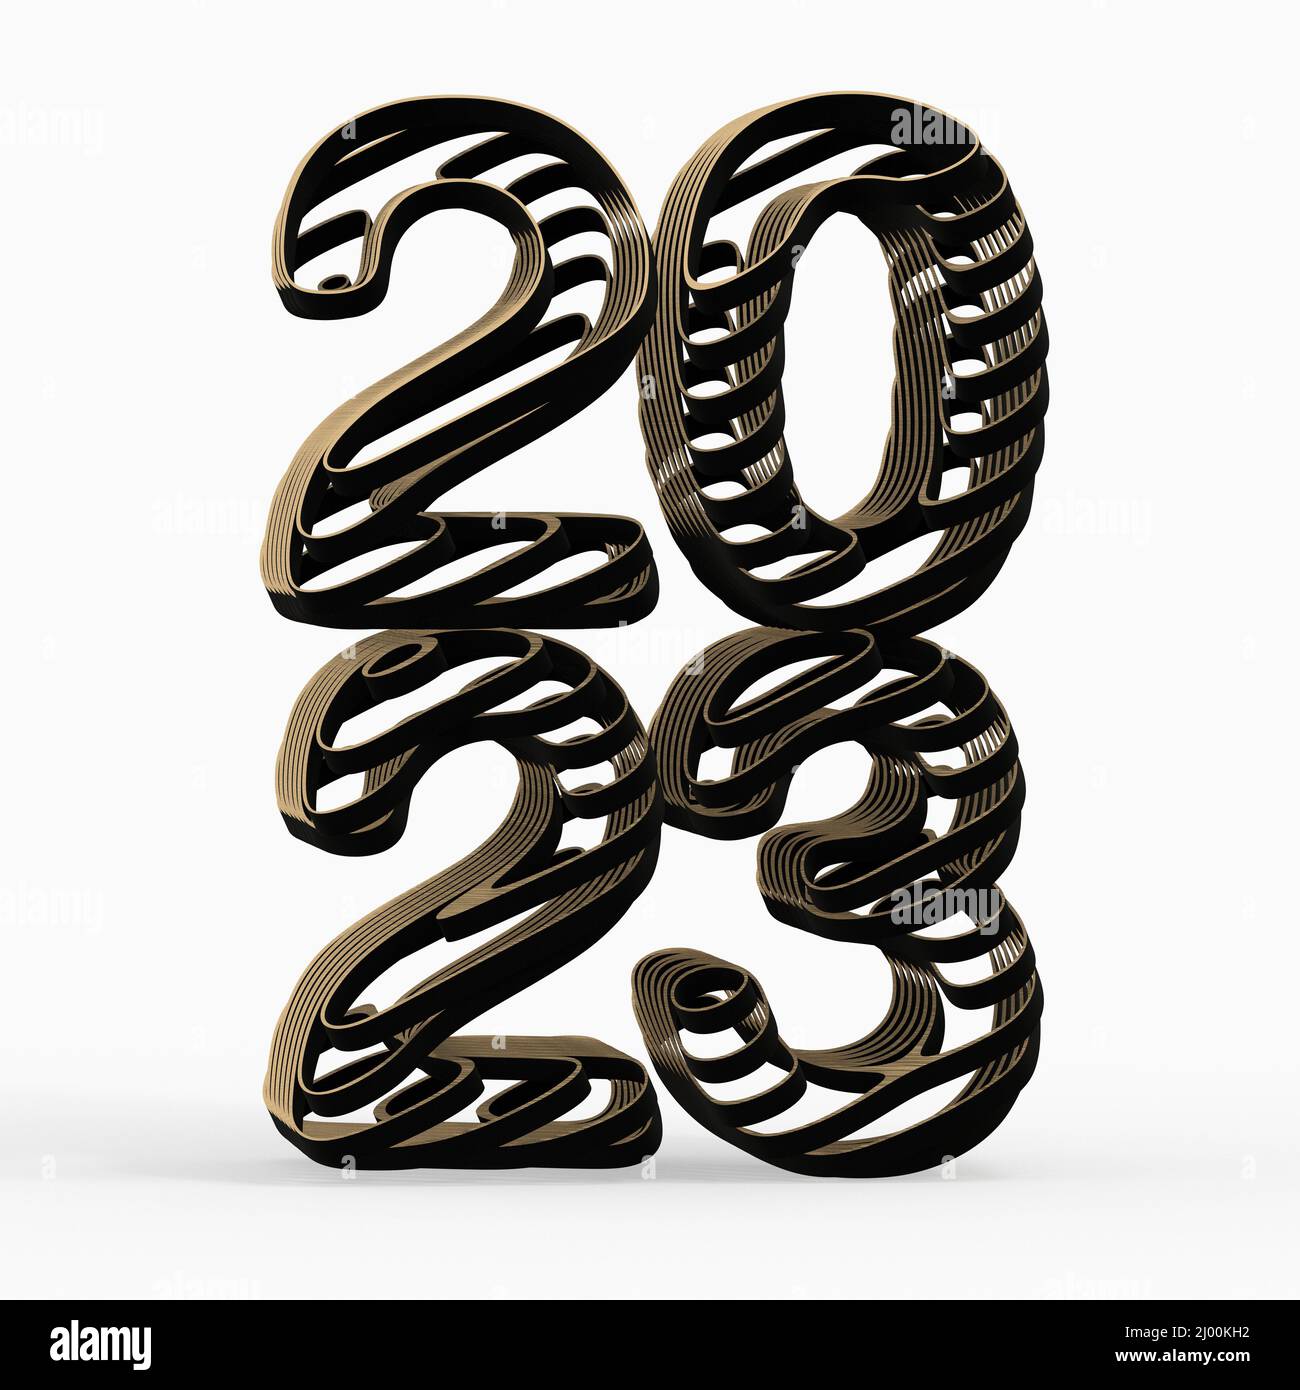 Vertical 3d Rendering Of A Typography Design Of Business Year 2023 Against A White Background 2J00KH2 